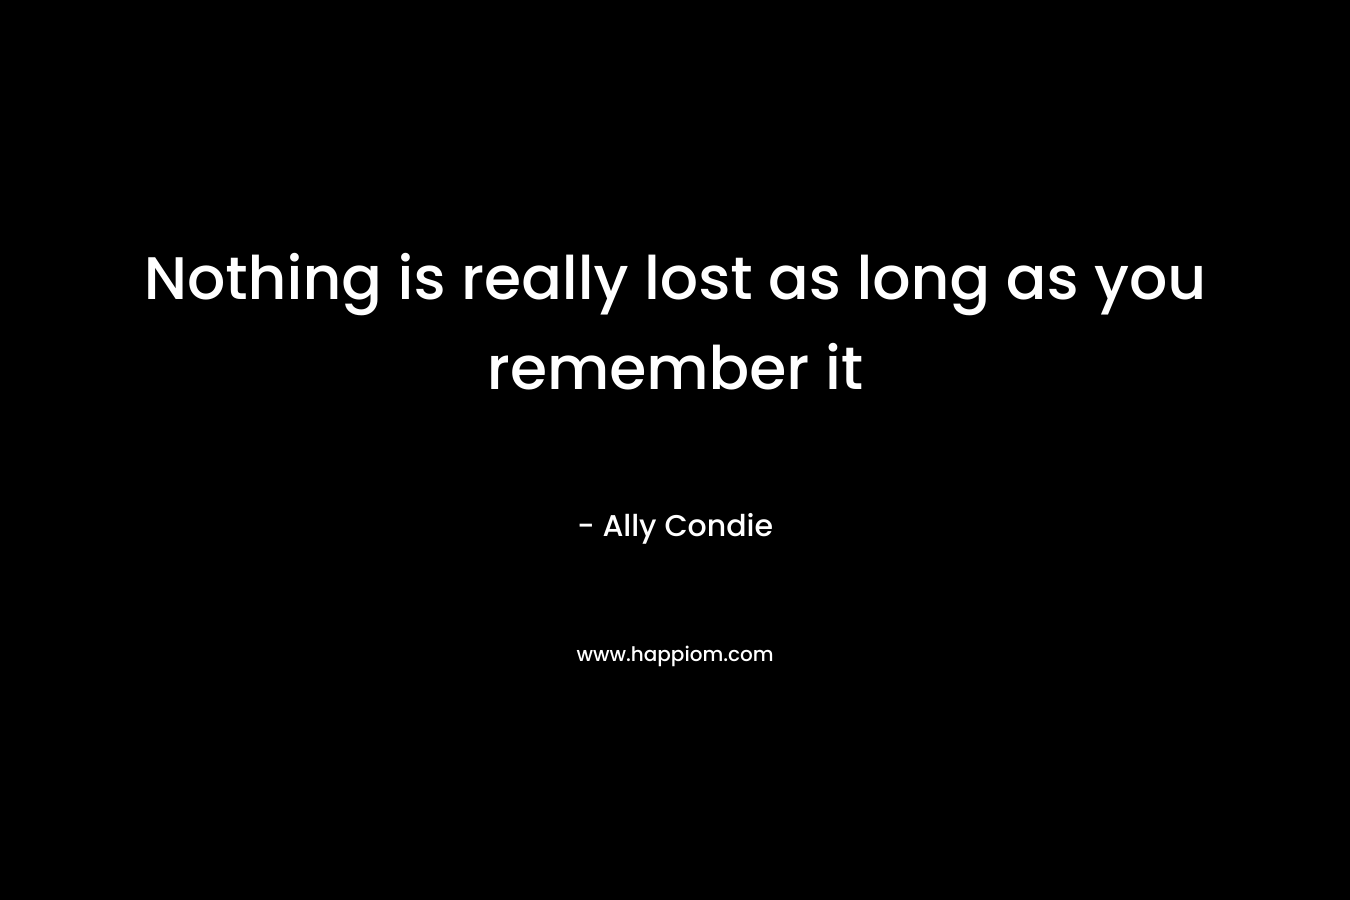 Nothing is really lost as long as you remember it